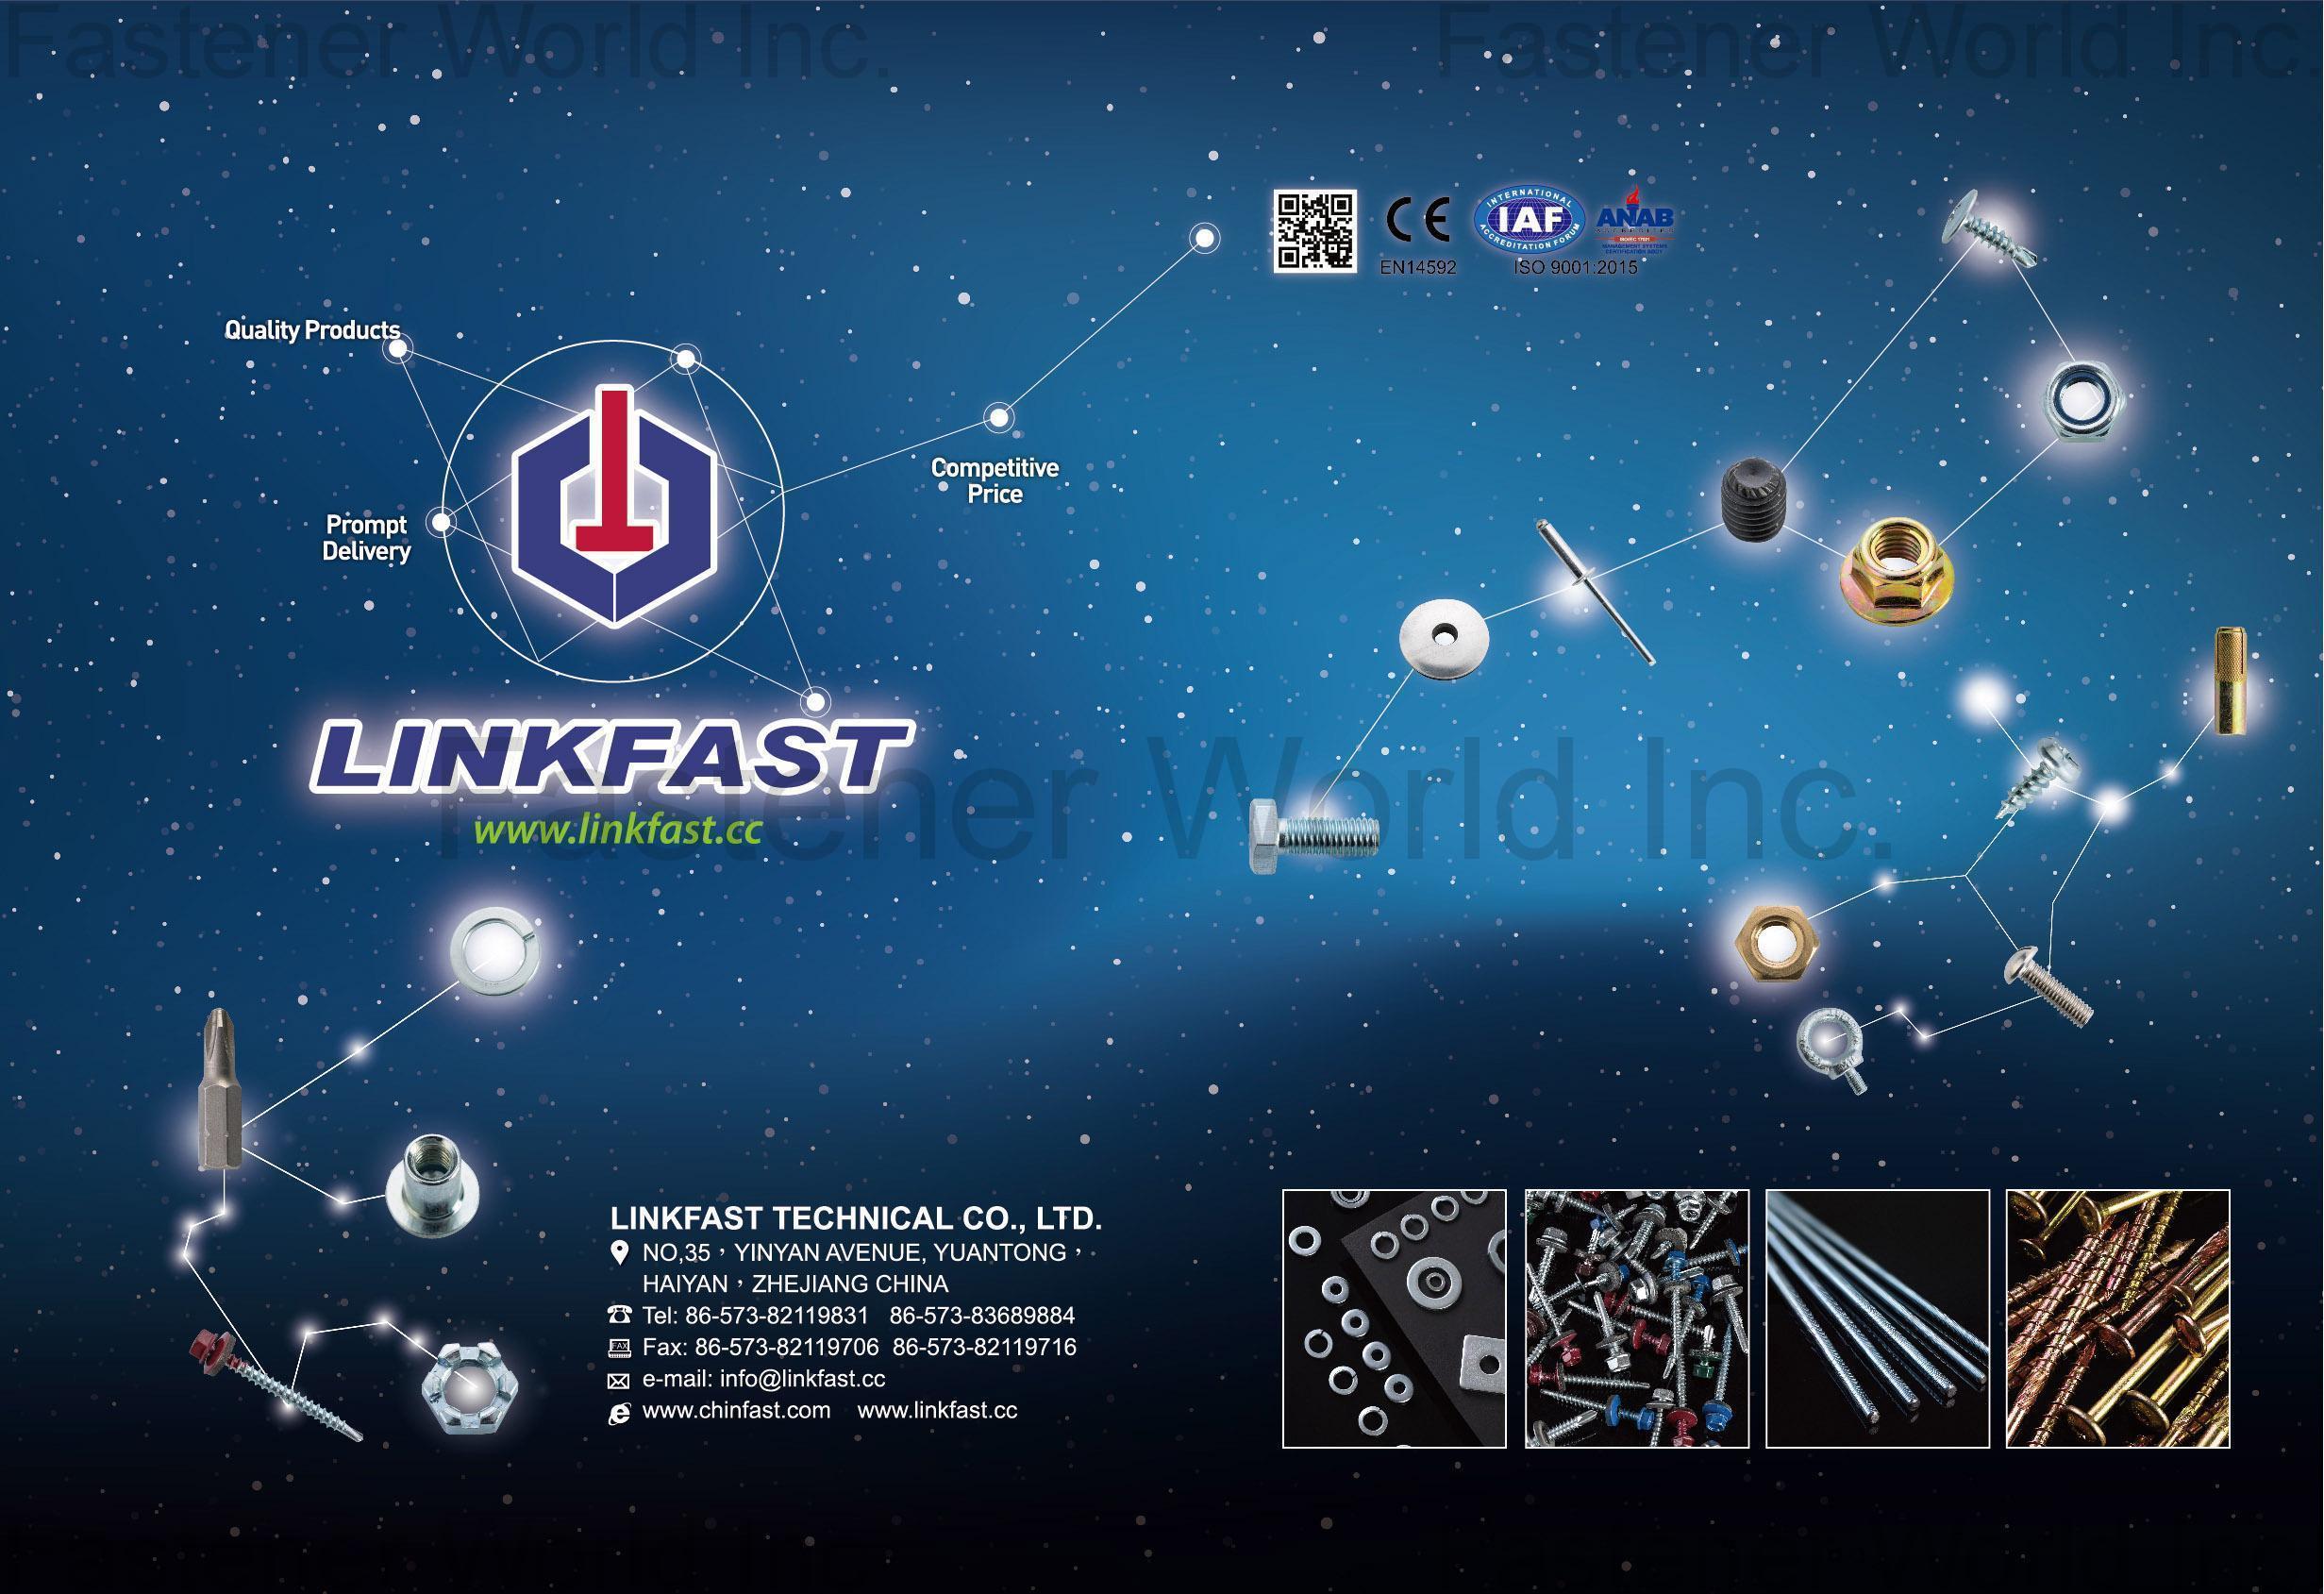 LINKFAST TECHNICAL CO., LTD. , Flat Washers/ All Kinds of Nuts/All Kinds of Screws /Thread Rods / Rivets / Sleeve Anchors / Drop-in Anchors / Wedge Anchors / Clamps in General / Stamped Parts / Tapping Screws / Hexagon Head Bolts